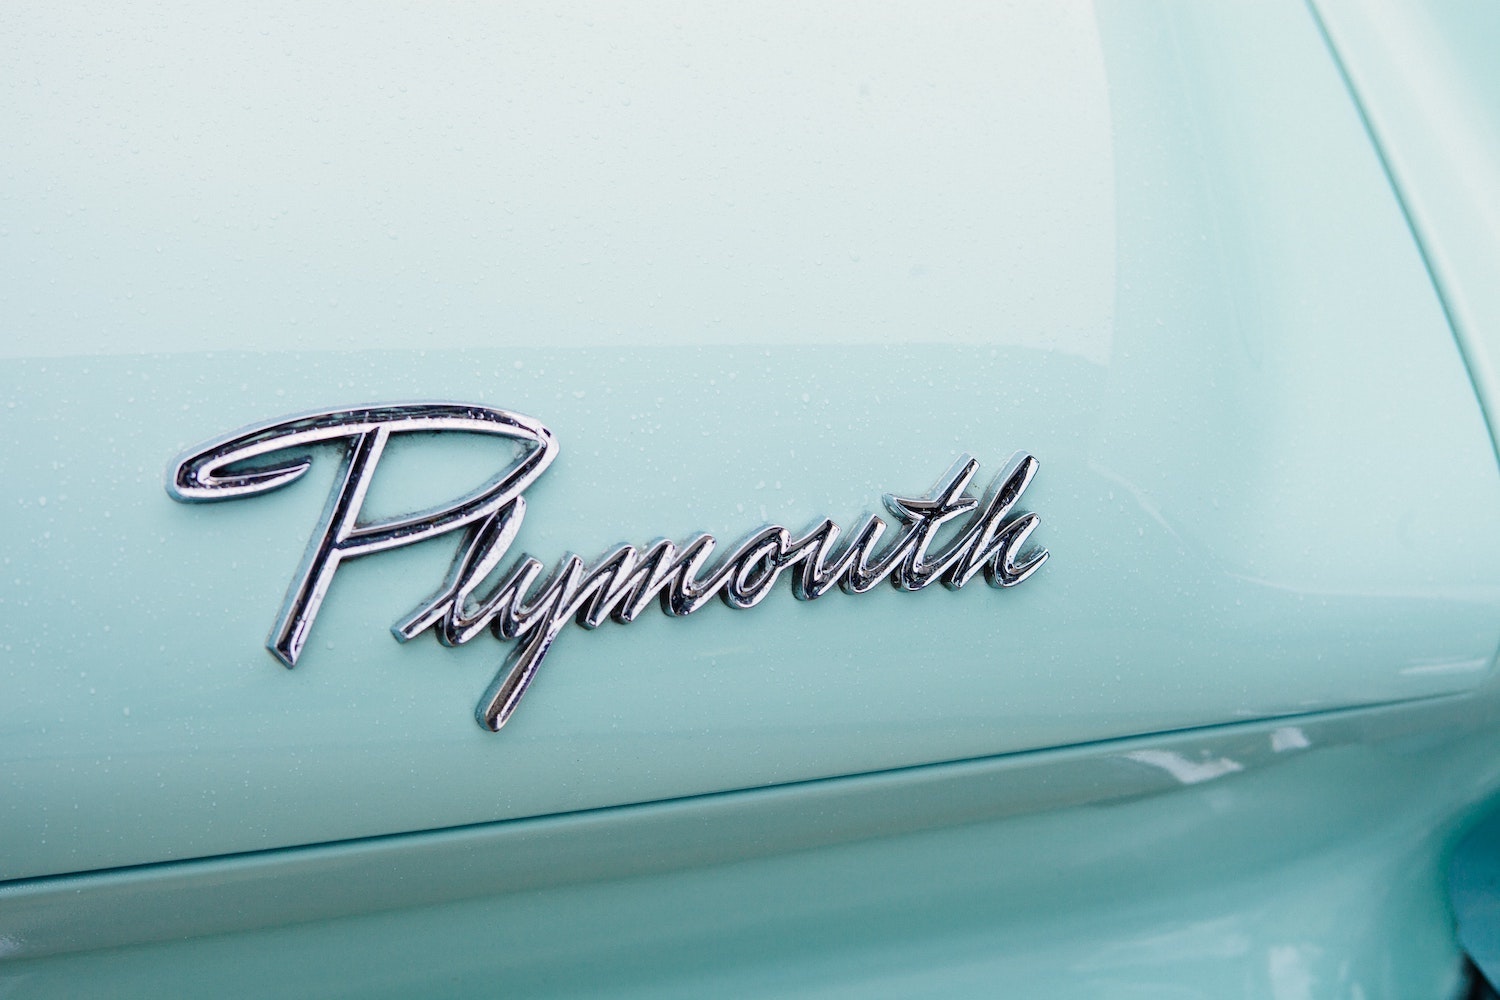 Chrome Plymouth brand logo on the trunk of an aqua-colored classic car.